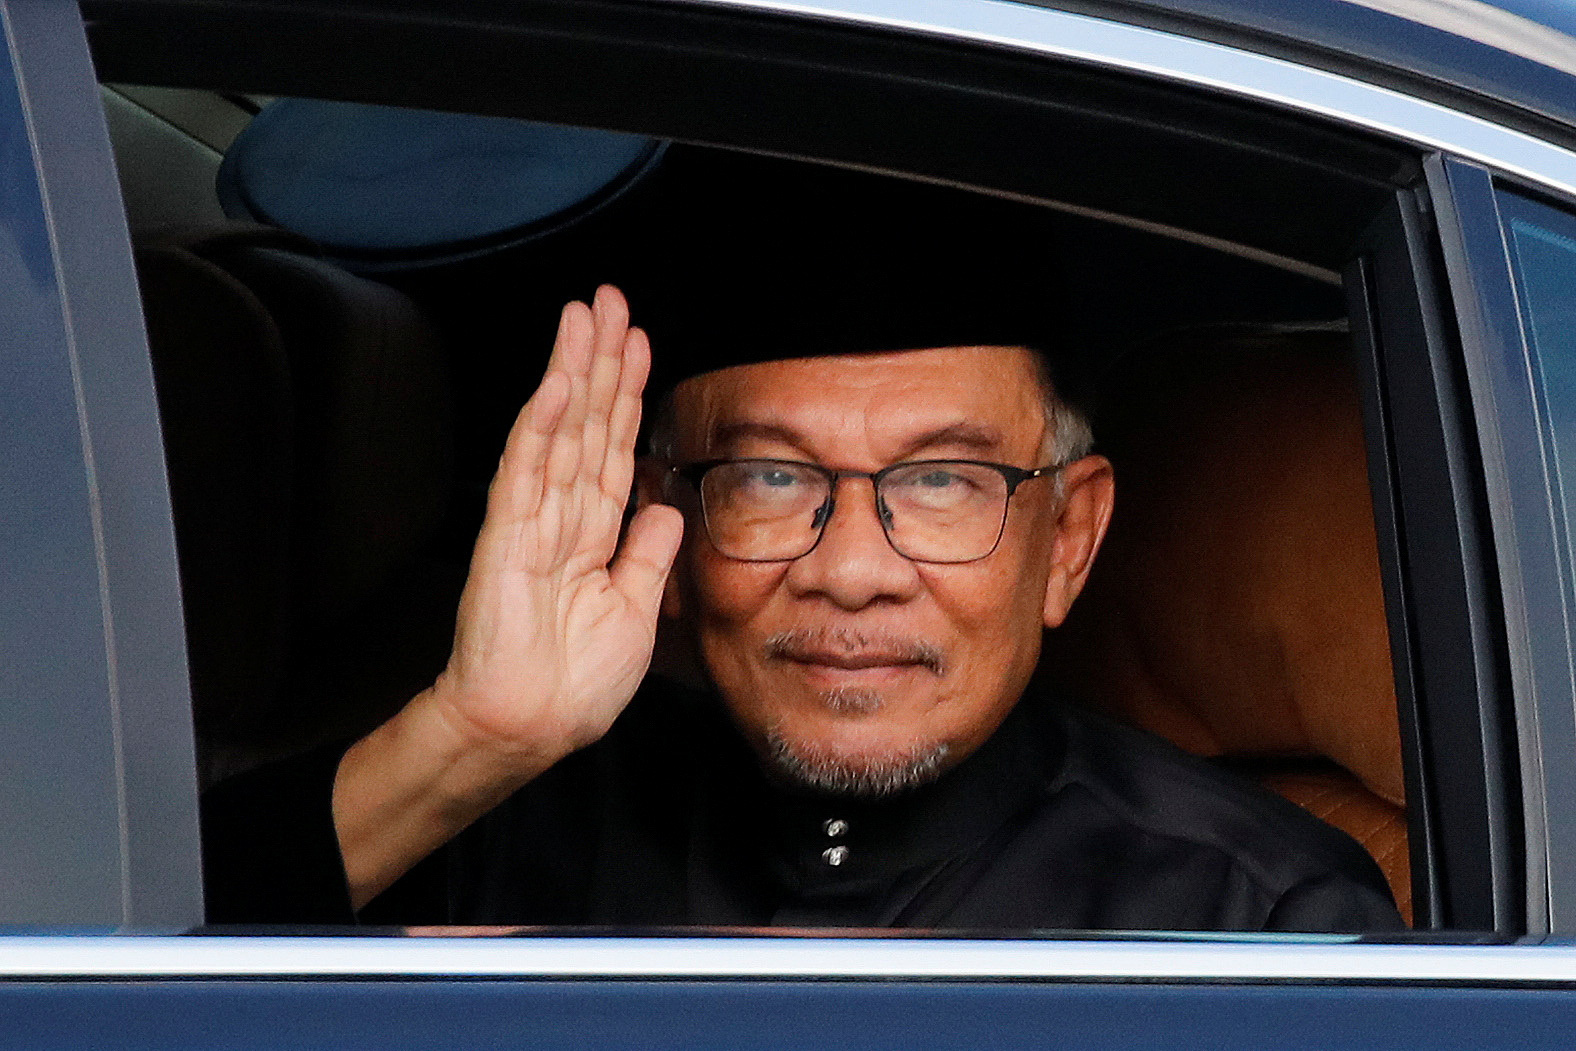 Malaysia's new Prime Minister Anwar Ibrahim greets the photographer as he arrives at the National Palace in Kuala Lumpur, Malaysia November 24, 2022. Fazry Ismail/Pool via REUTERS